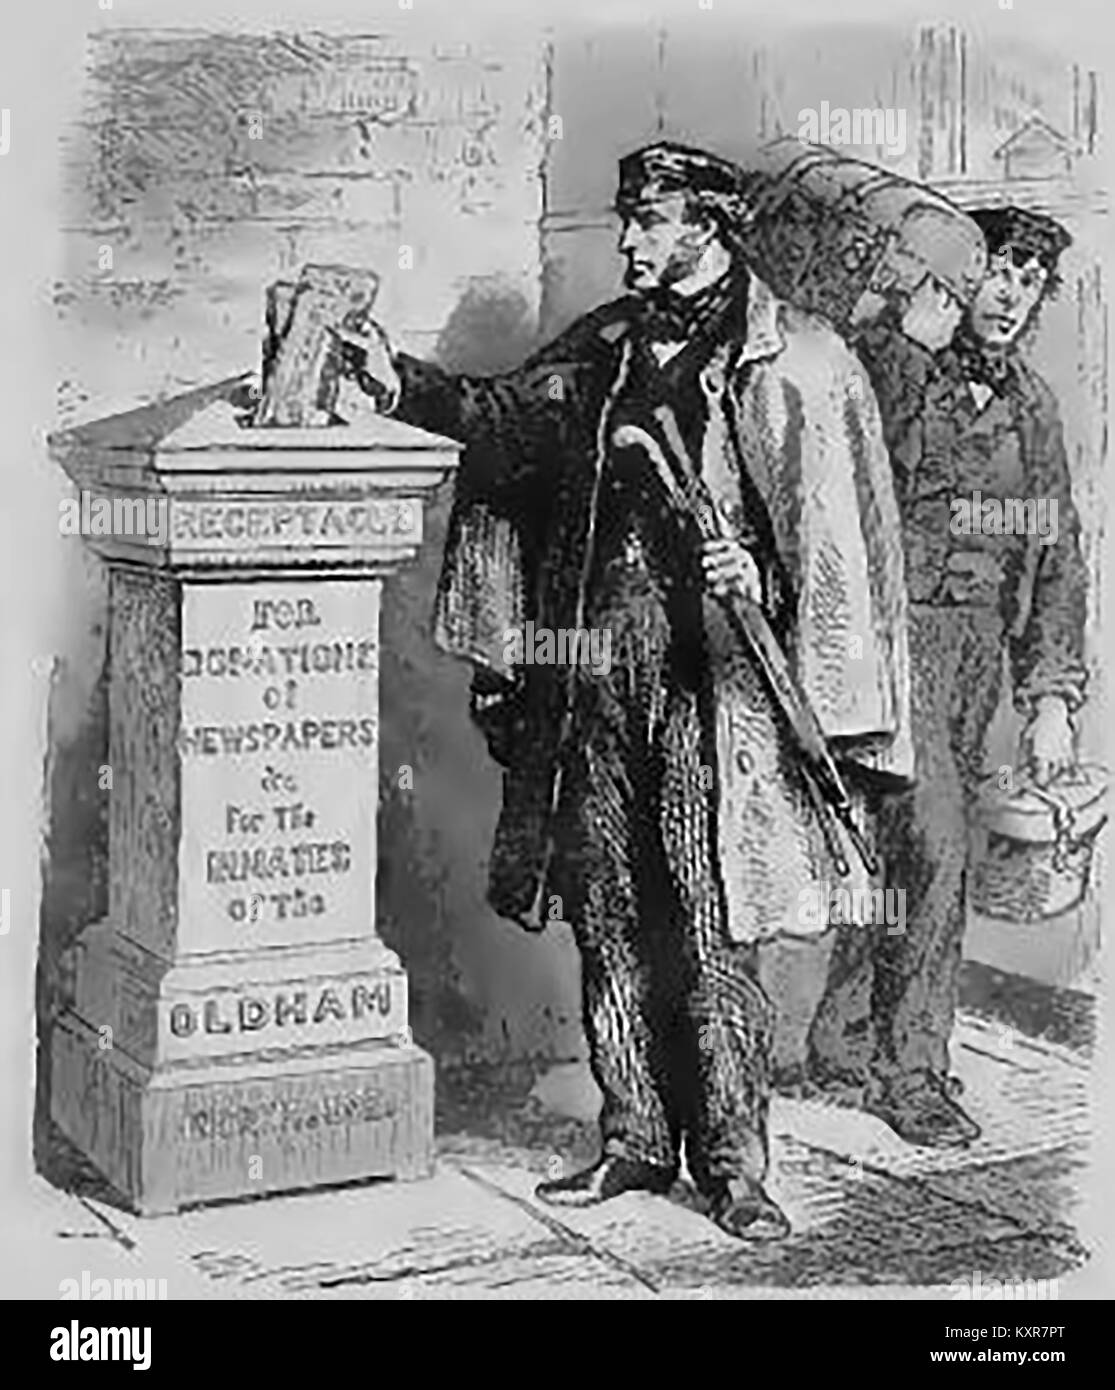 RECYCLING - A box for the donation of newspapers  at the railway station Oldham, Lancashire, UK in  1863 Stock Photo